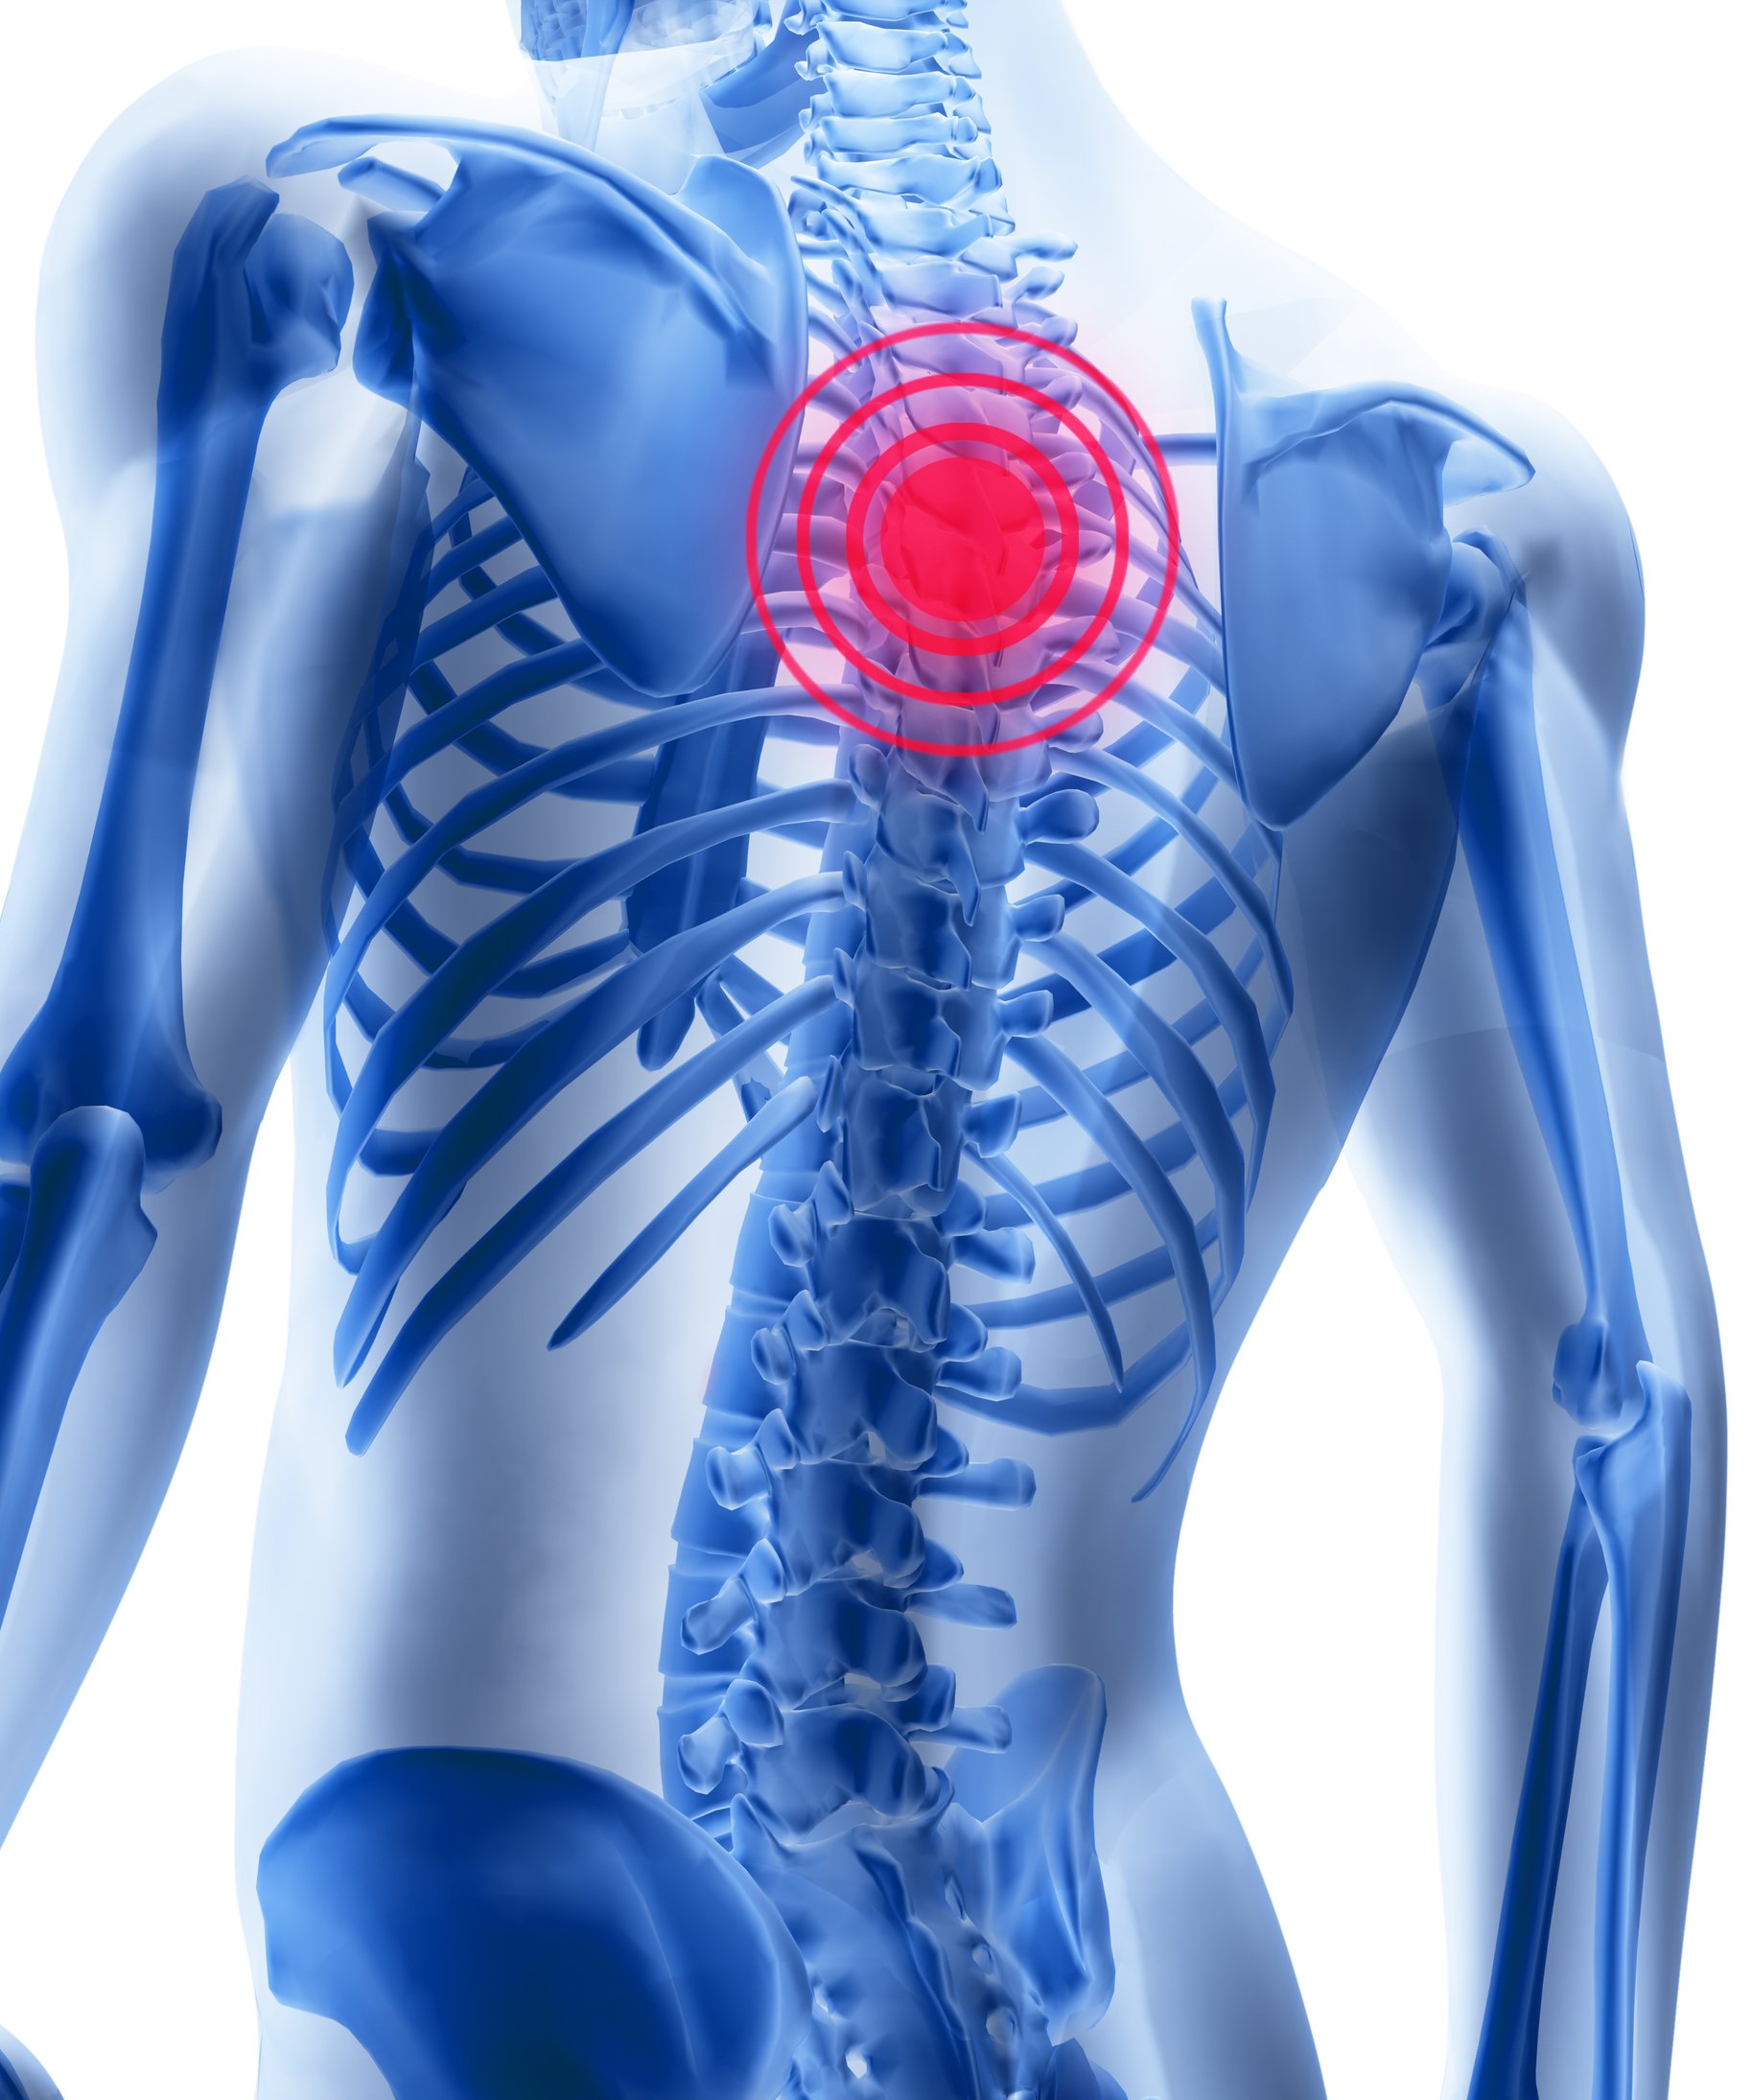 Thoracic Spine Treatment Pain and Treatment. Bra line pain? How do